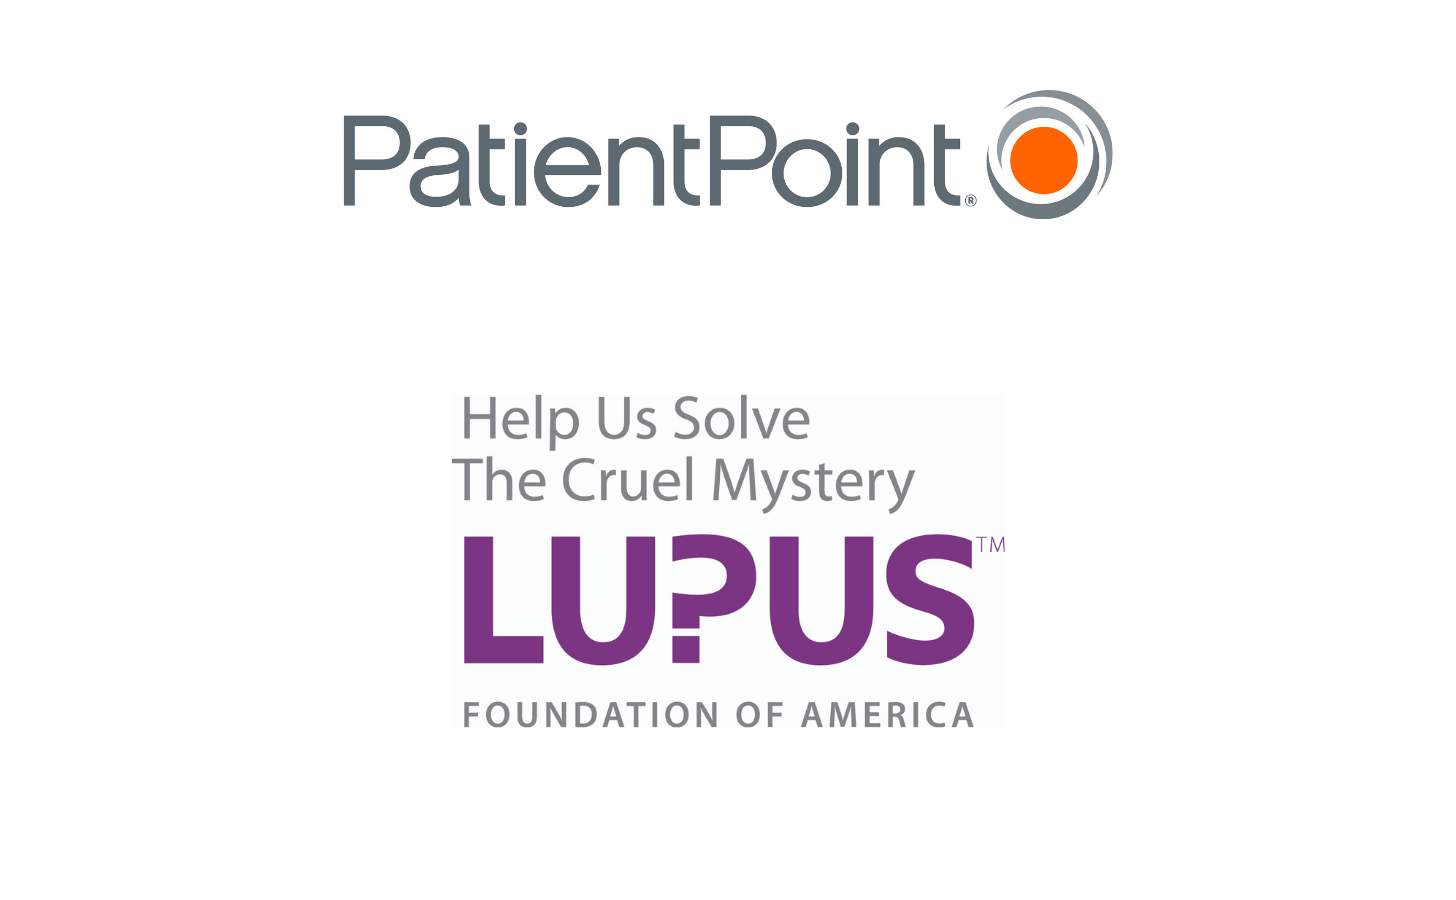 PatientPoint logo and Lupus Foundation of America logo